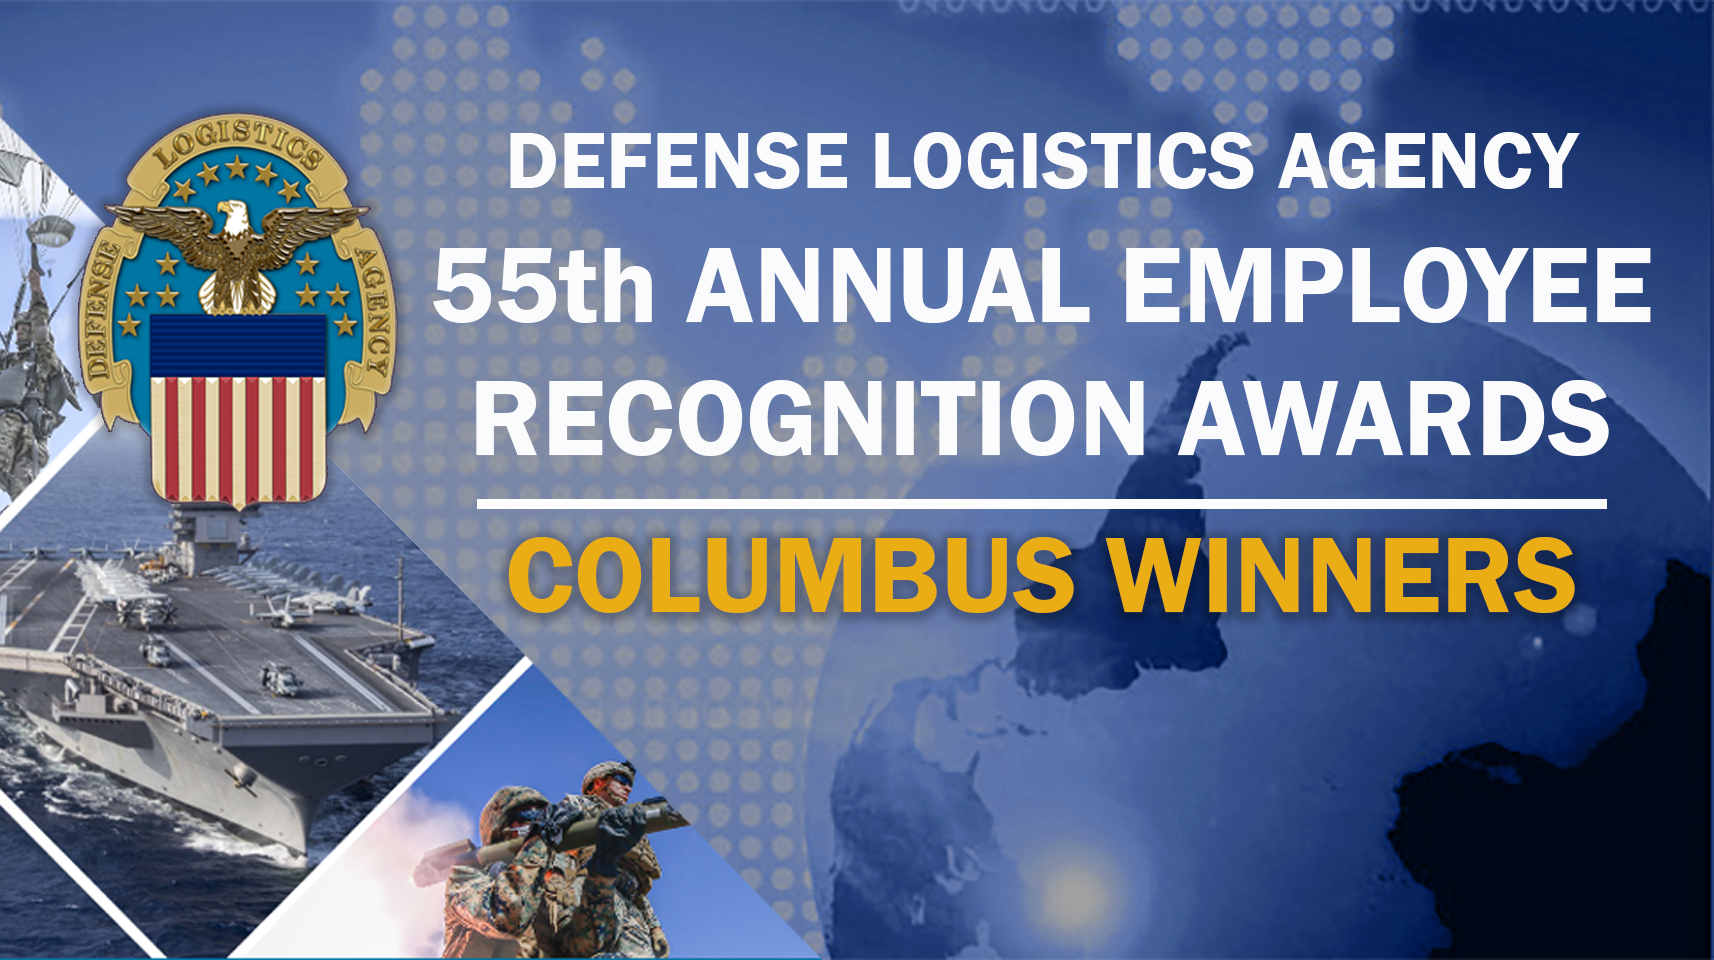 Columbus recipients of 55th Annual Employee Recognition Awards ...